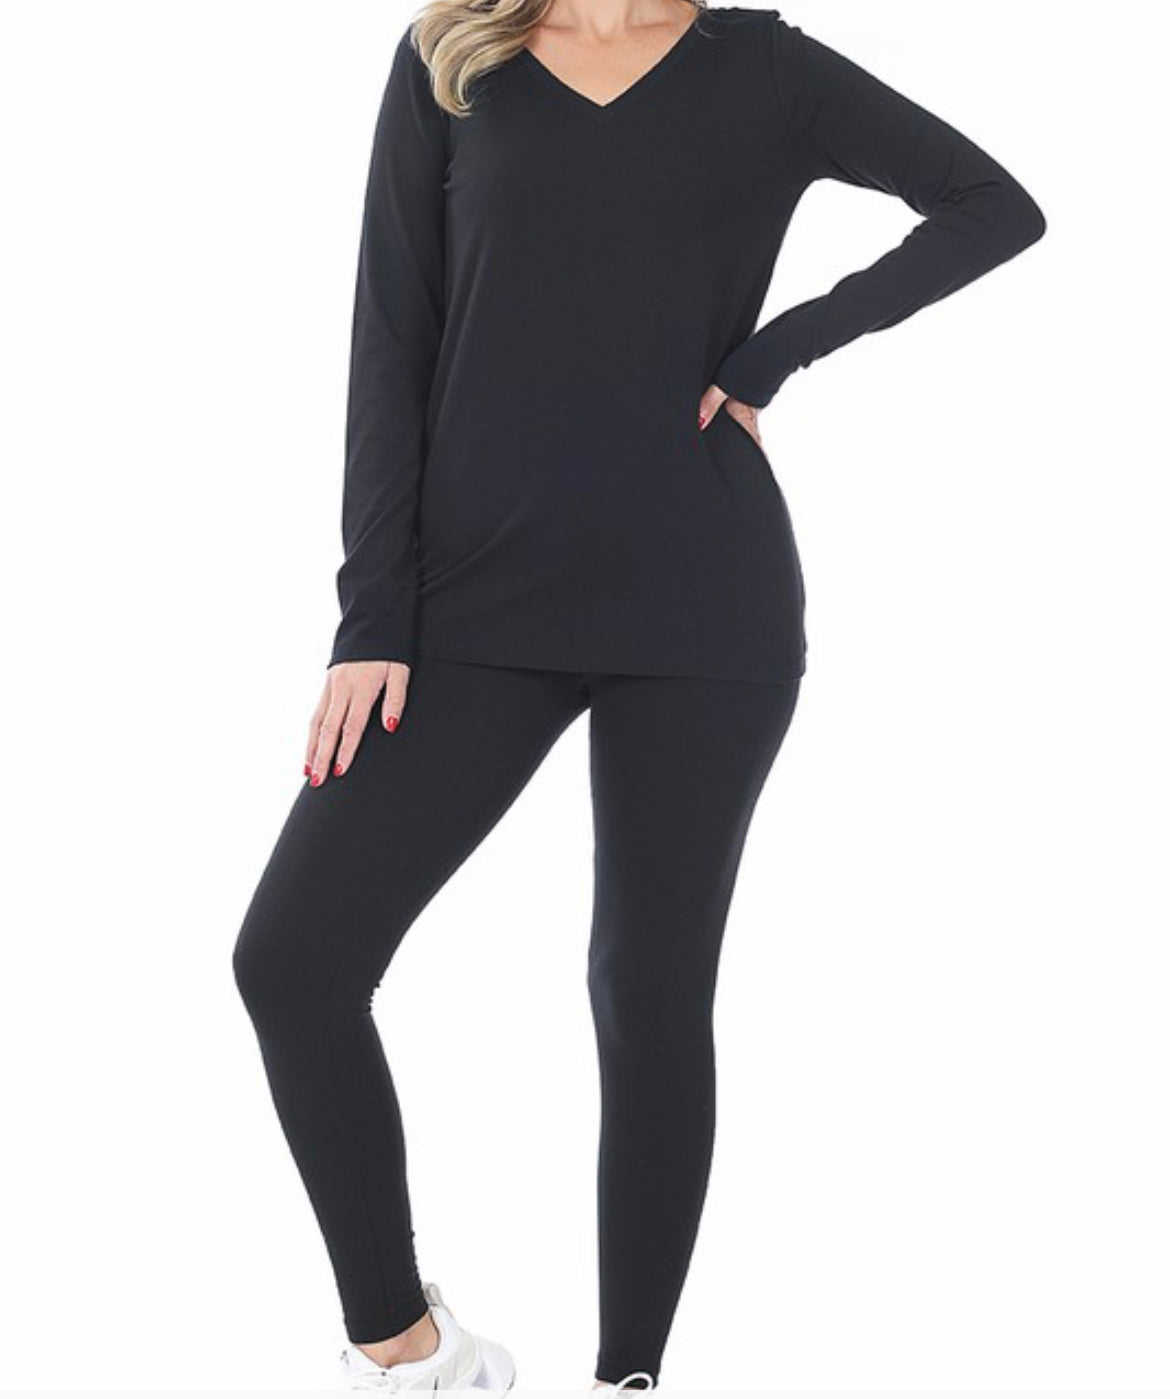 Black 2 piece cotton legging set. Top v-neck with long sleeves.